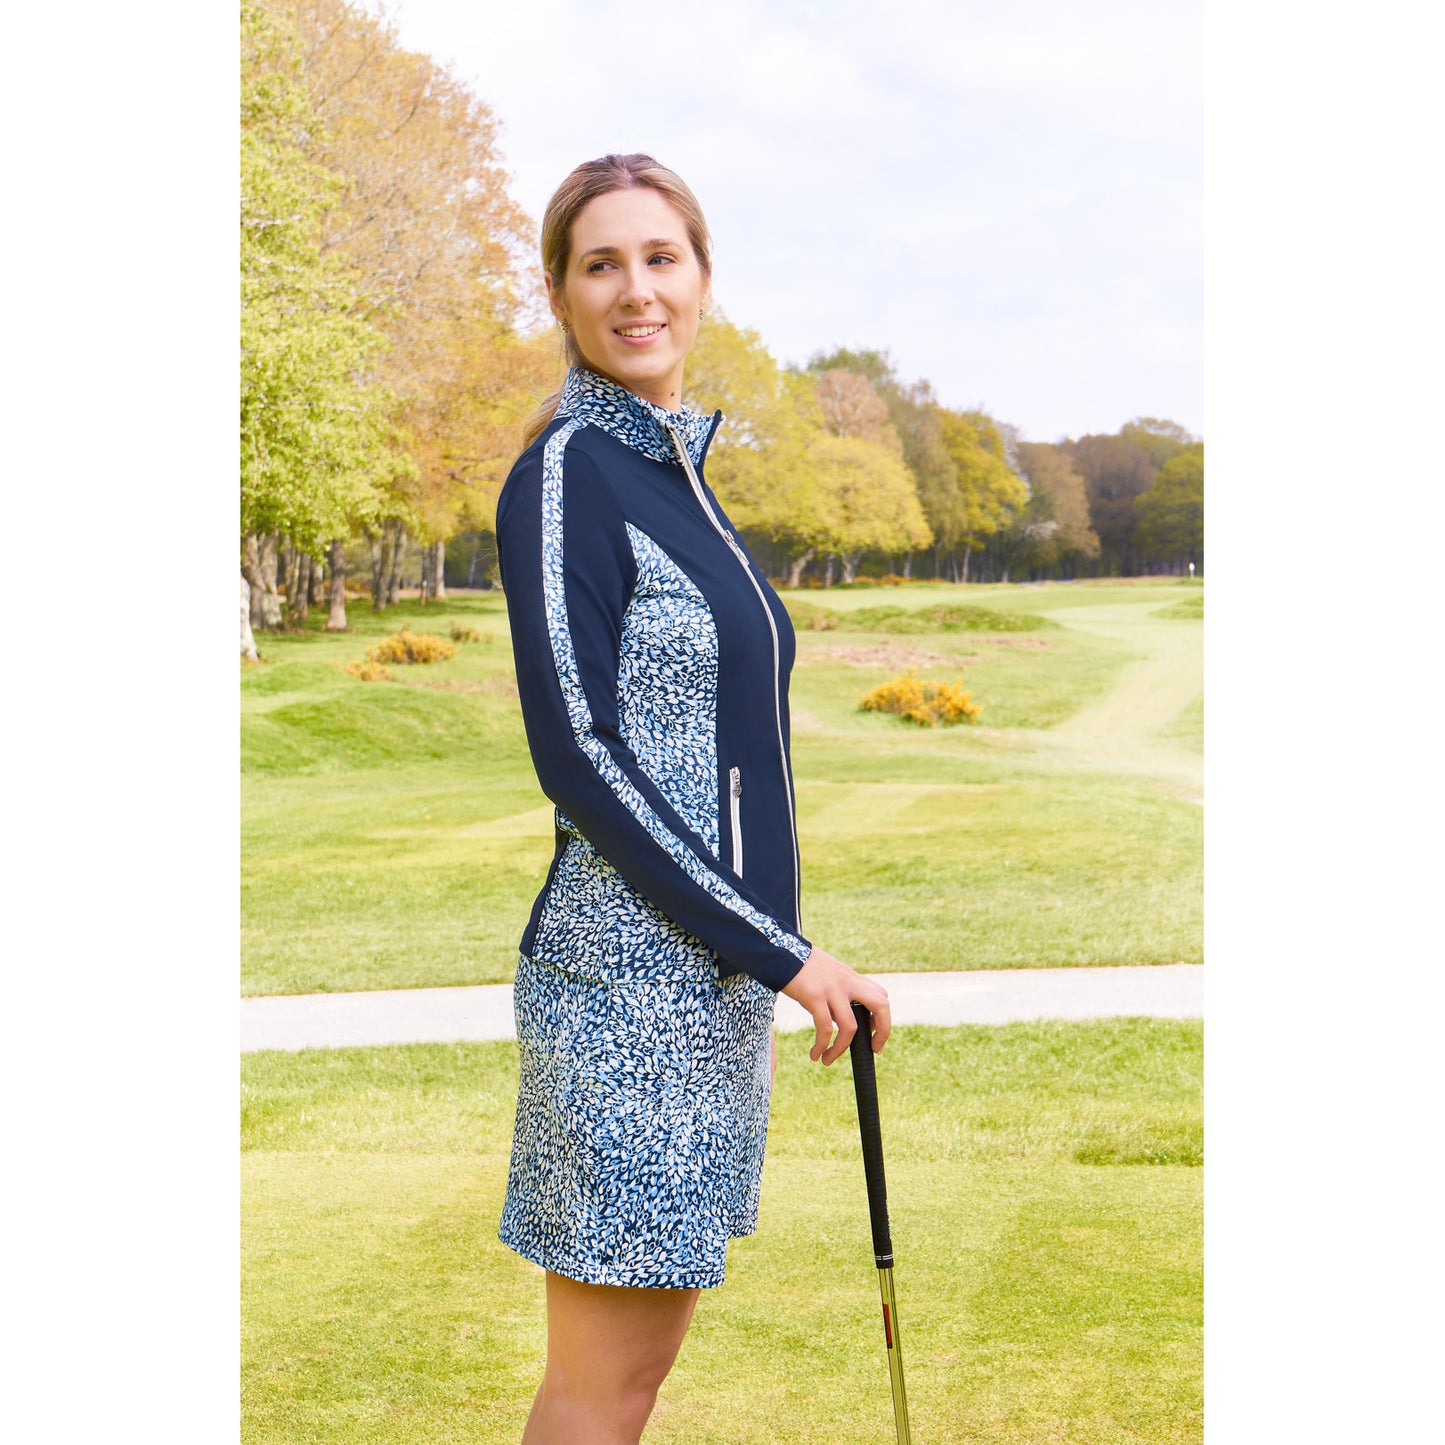 Pure Ladies Mid-Layer Golf Jacket in Navy and Peardrop Sapphire Print